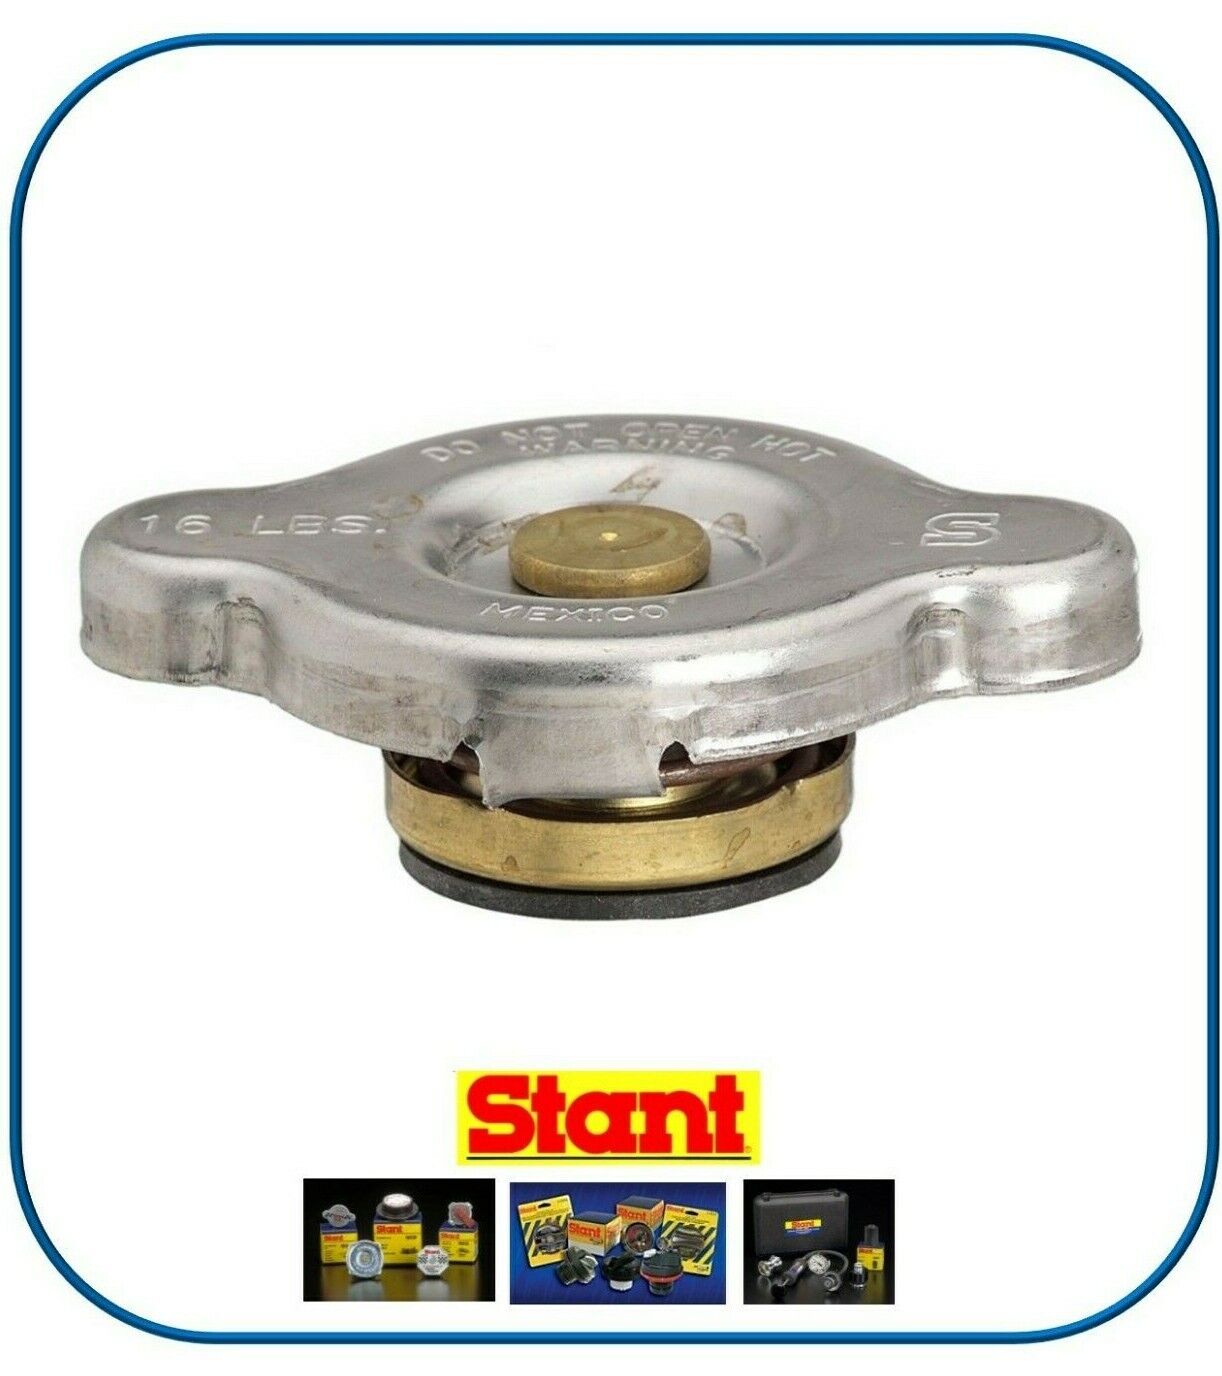 STANT 10233 OEM Type Coolant System Radiator Cap - OE Replacement Genuine 